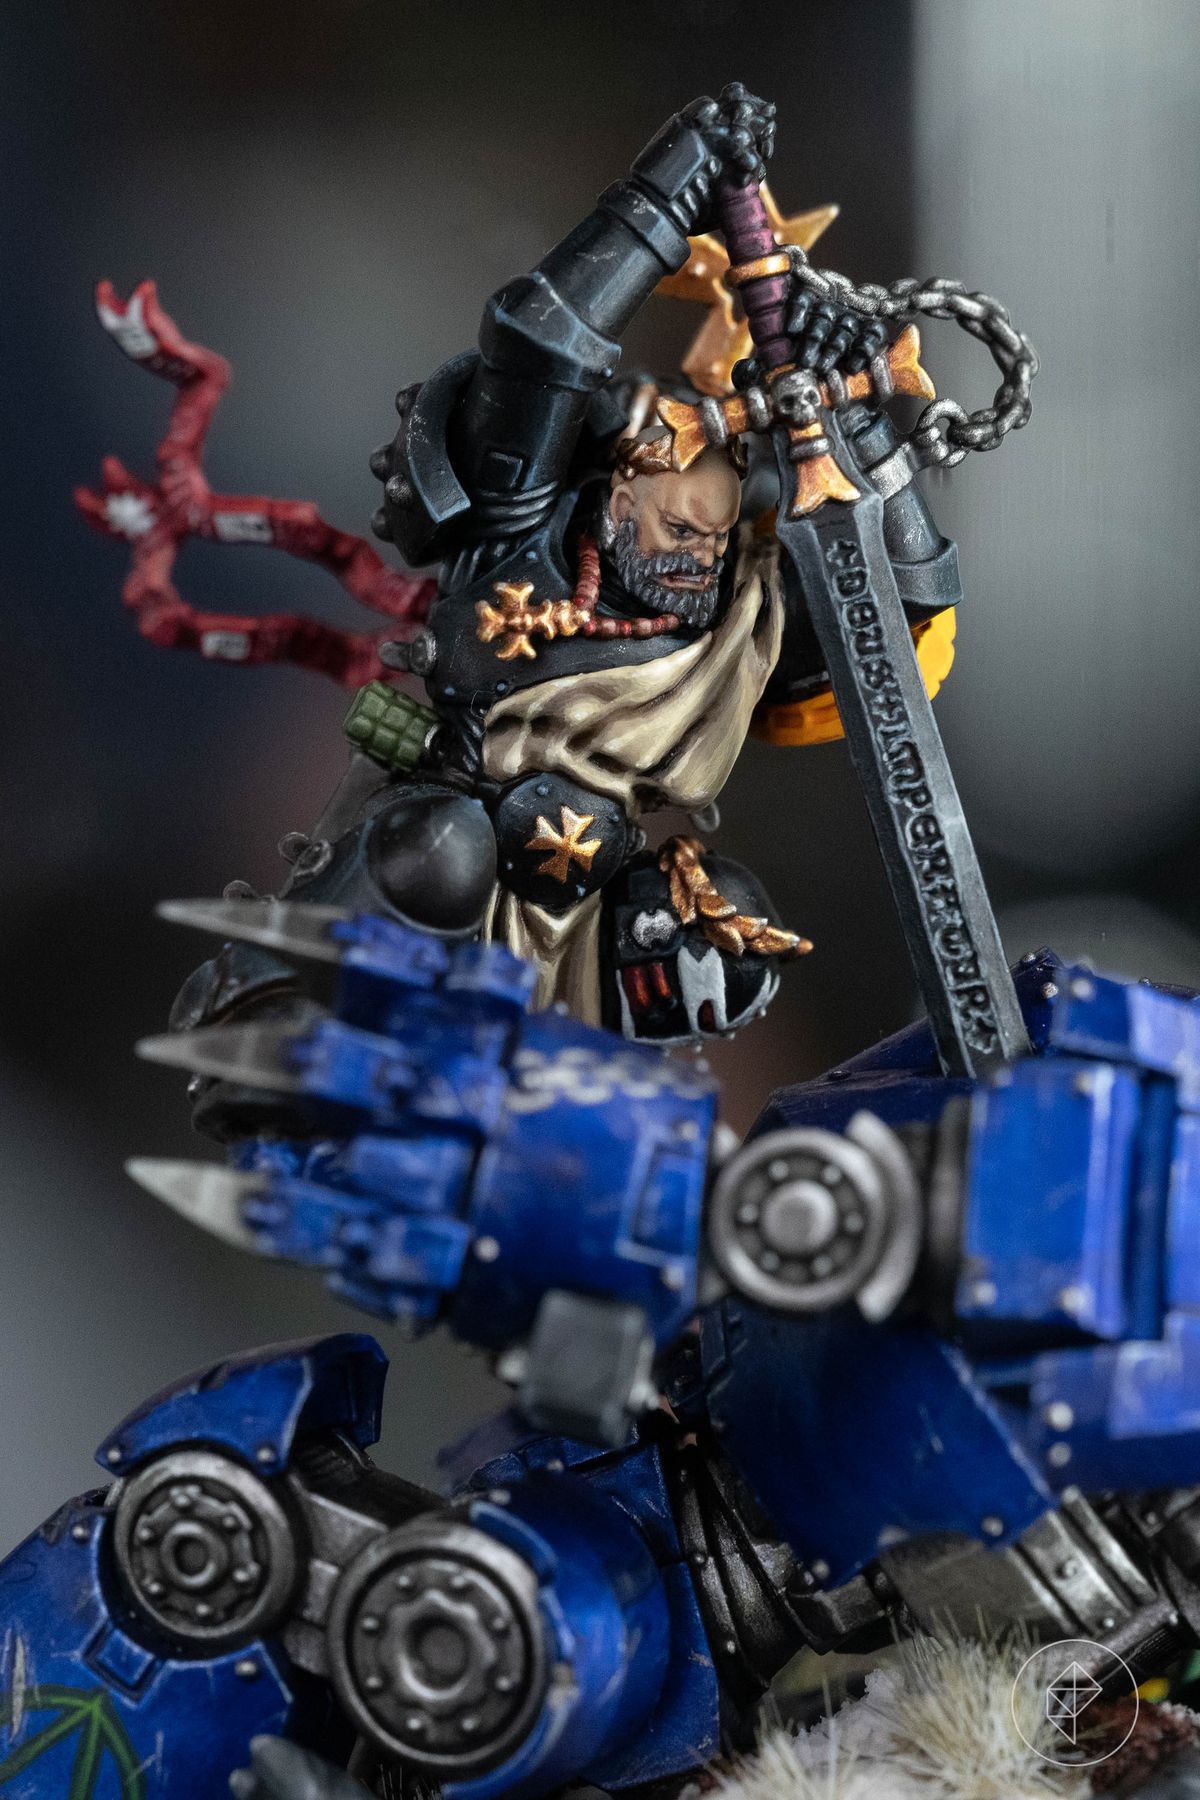 A Black Templars space marine plunges a sword into a dreadnought miniature, ribbons streaming behind him. His sword is inlaid with the words “Deus Imperator.”